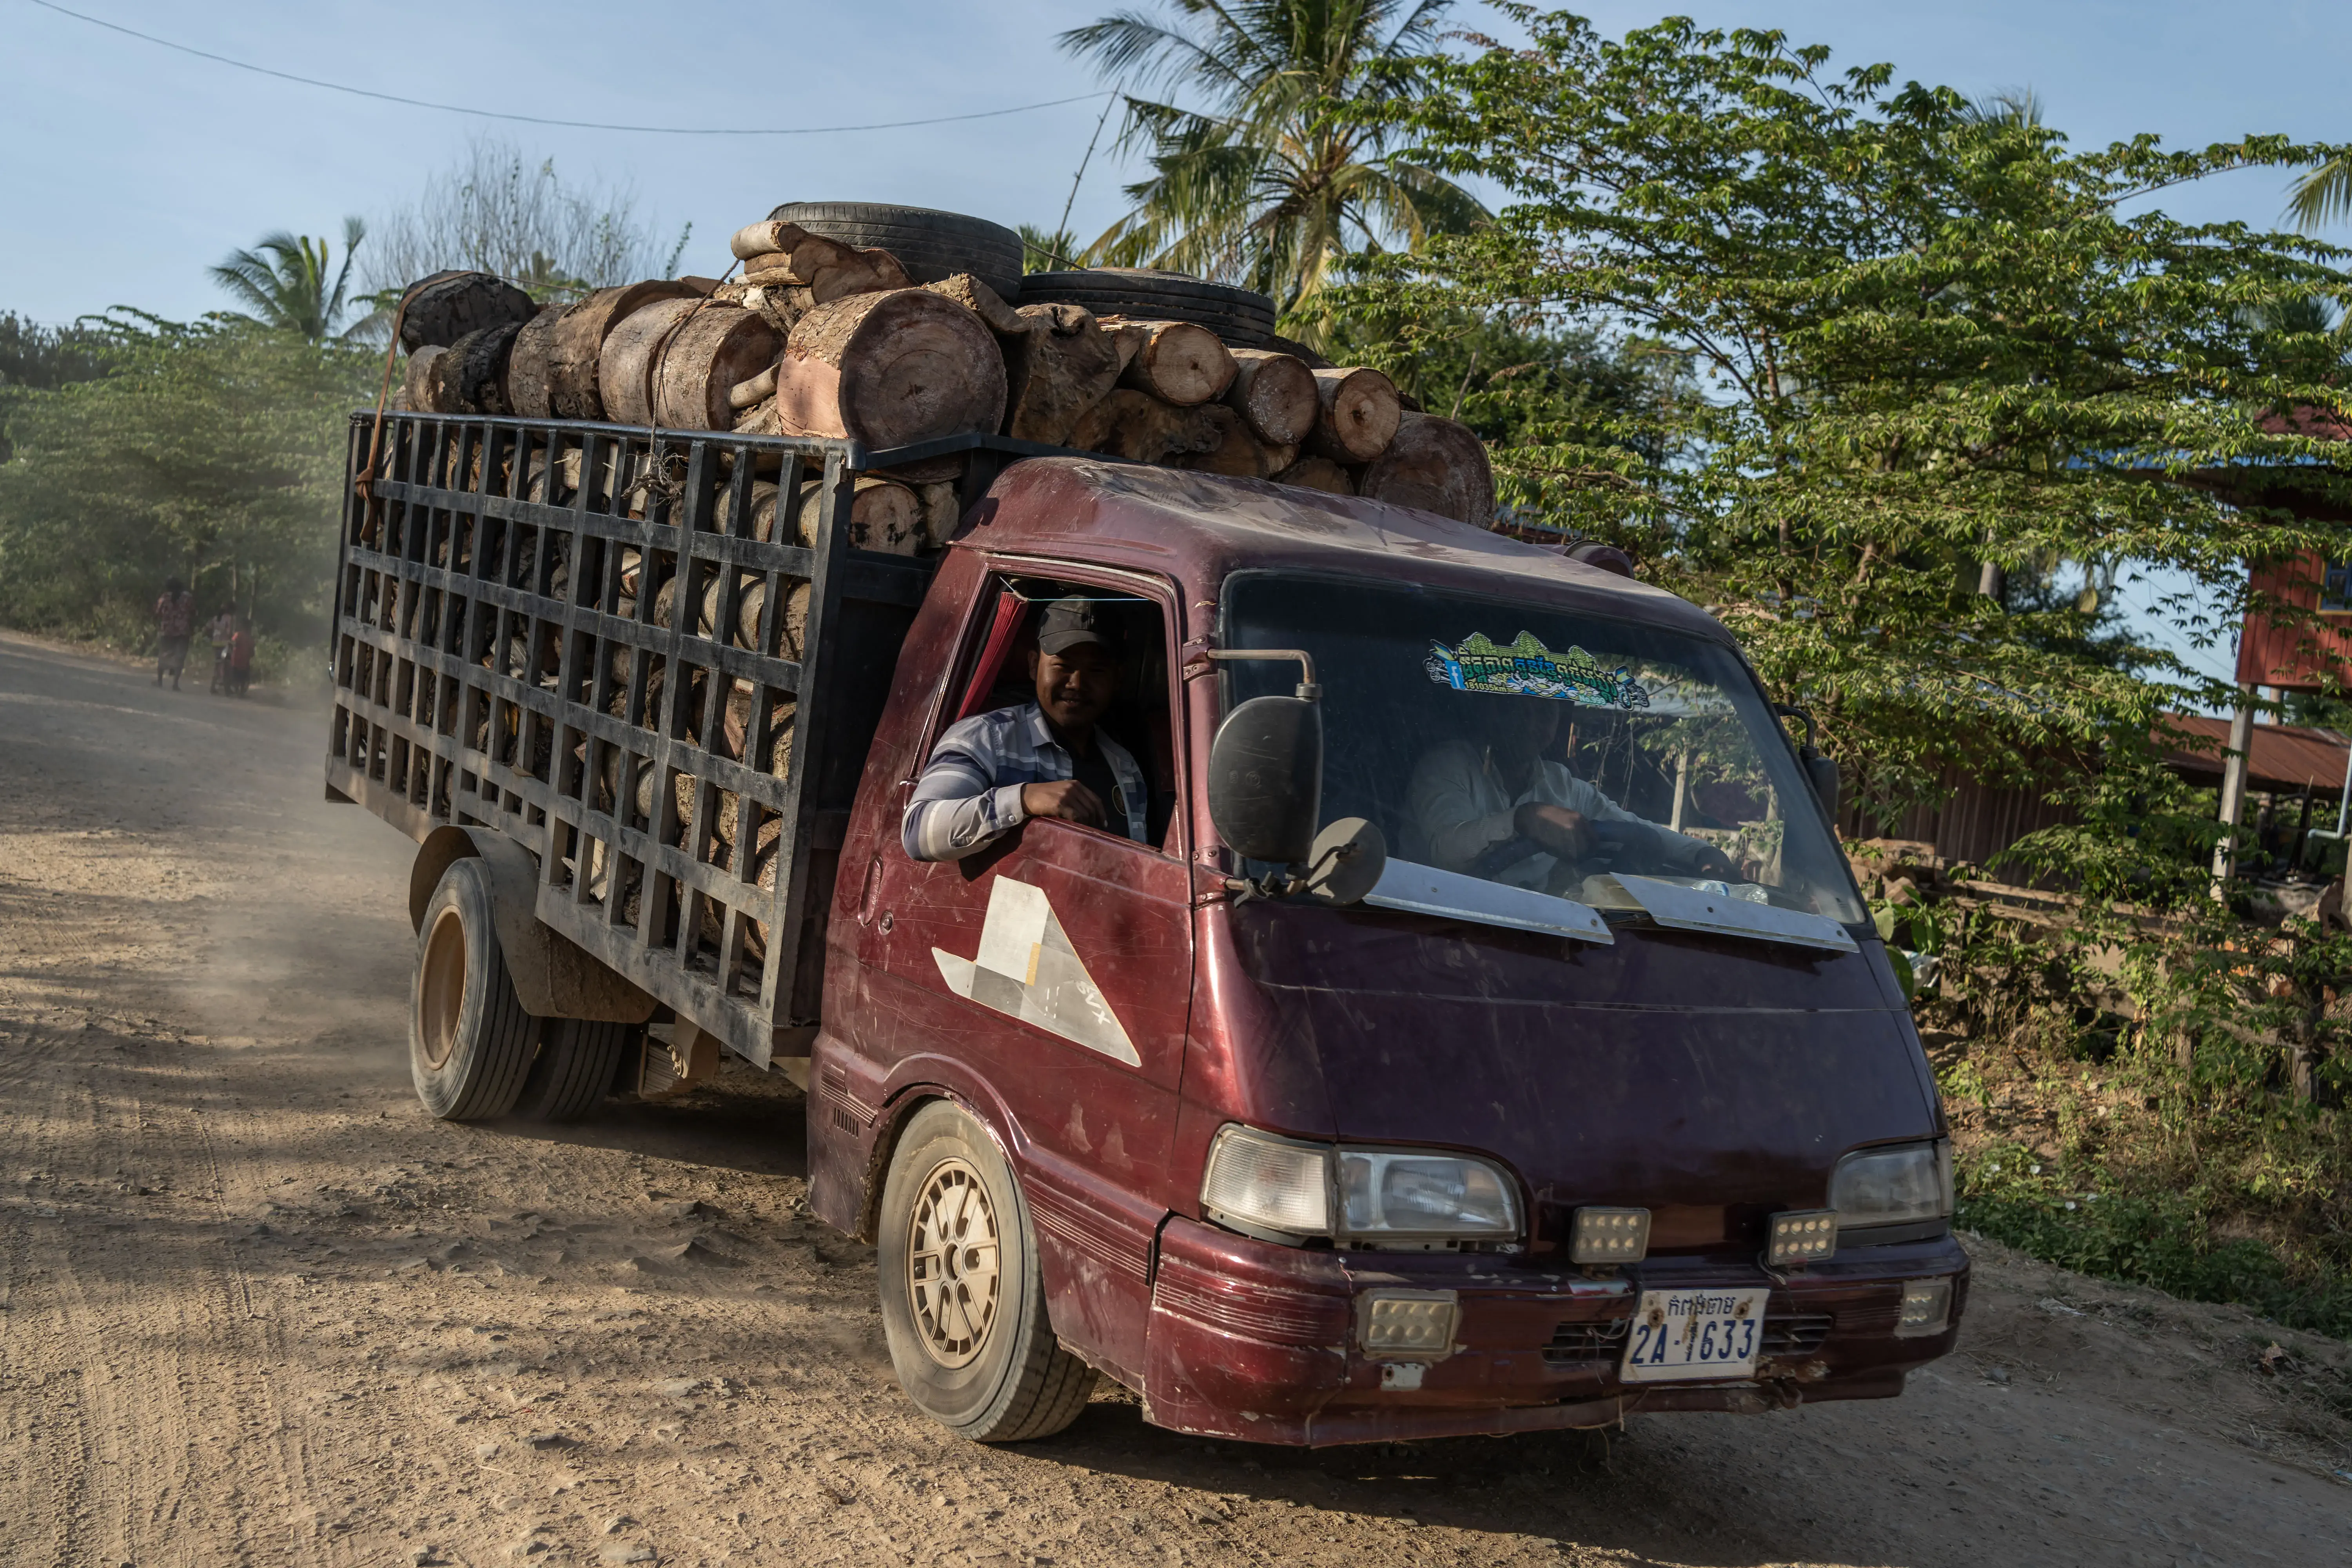 A middleman transports logs from the Aural Wildlife Sanctuary towards Chbar Mon where they will be sold to garment factories that incinerate the wood to generate steam. Credit: Andy Ball/Mongabay.